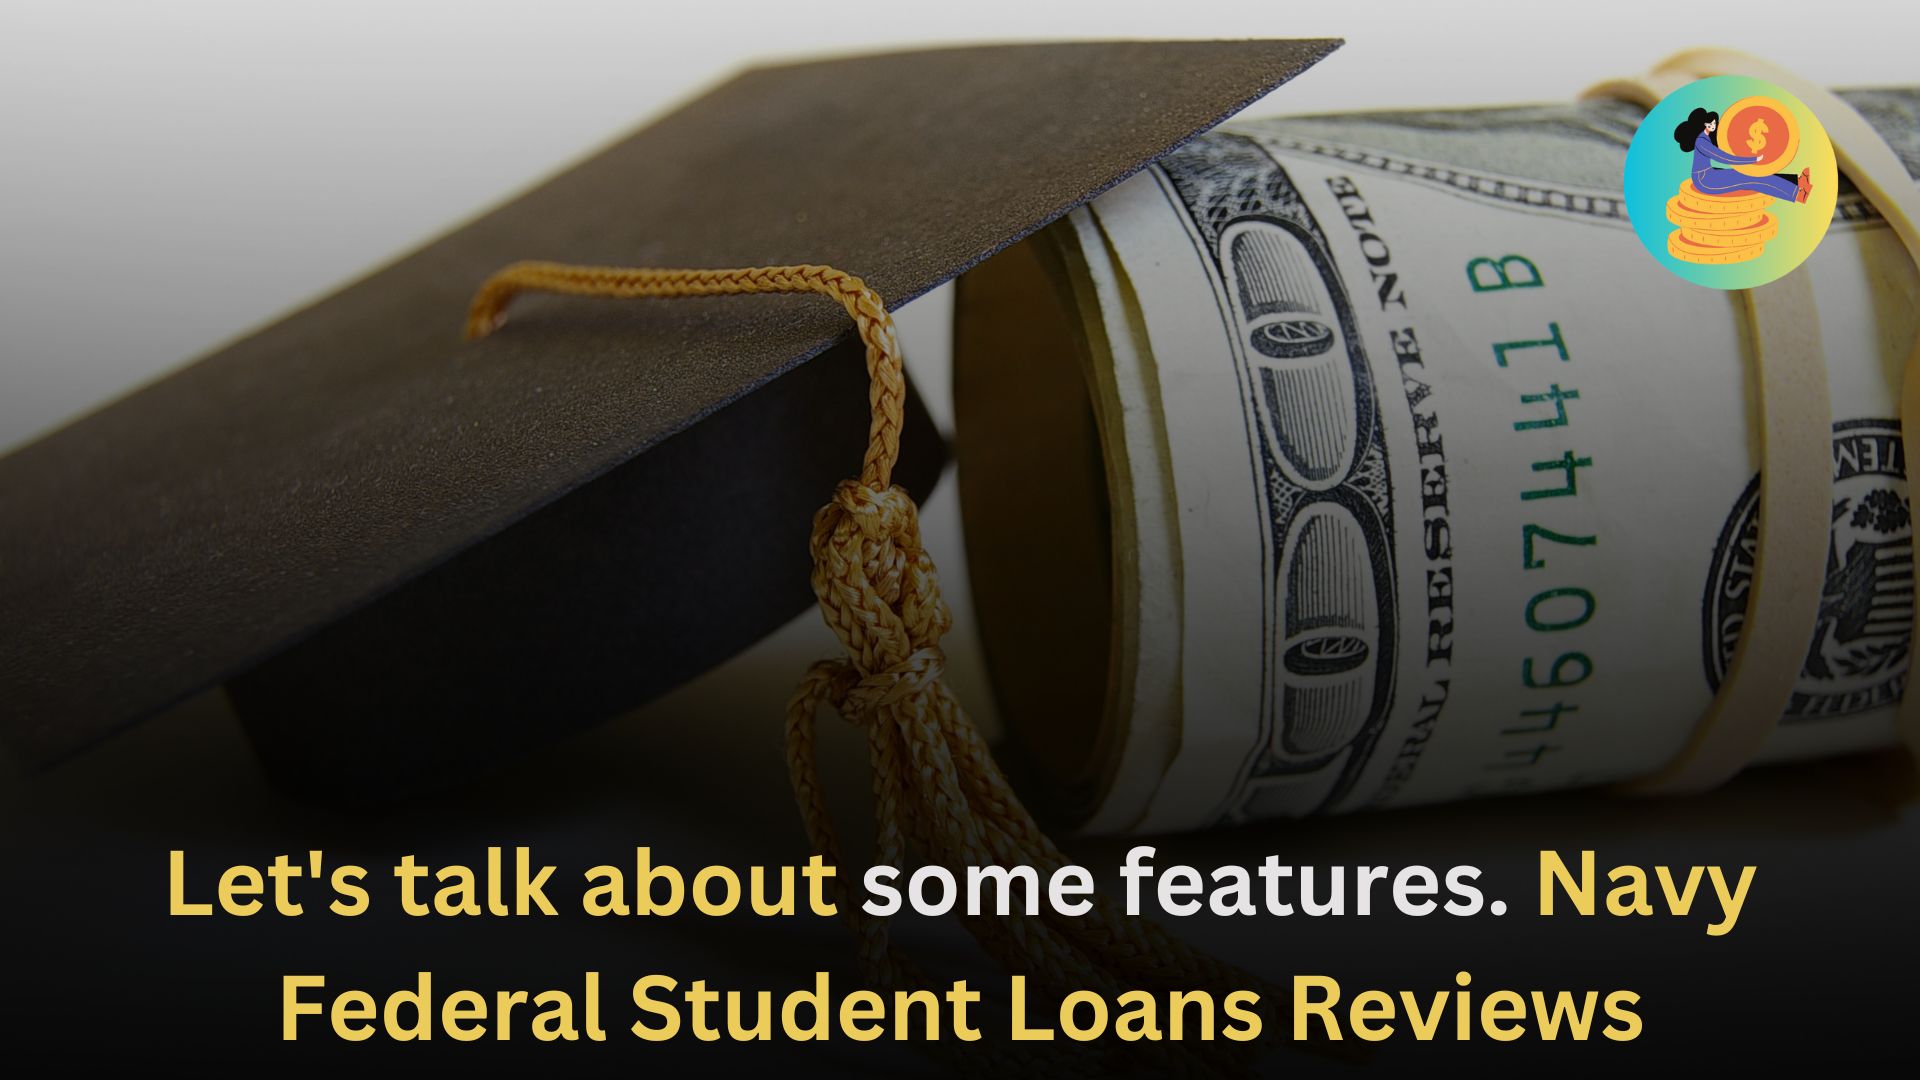 Let's talk about some features. Navy Federal Student Loans Reviews